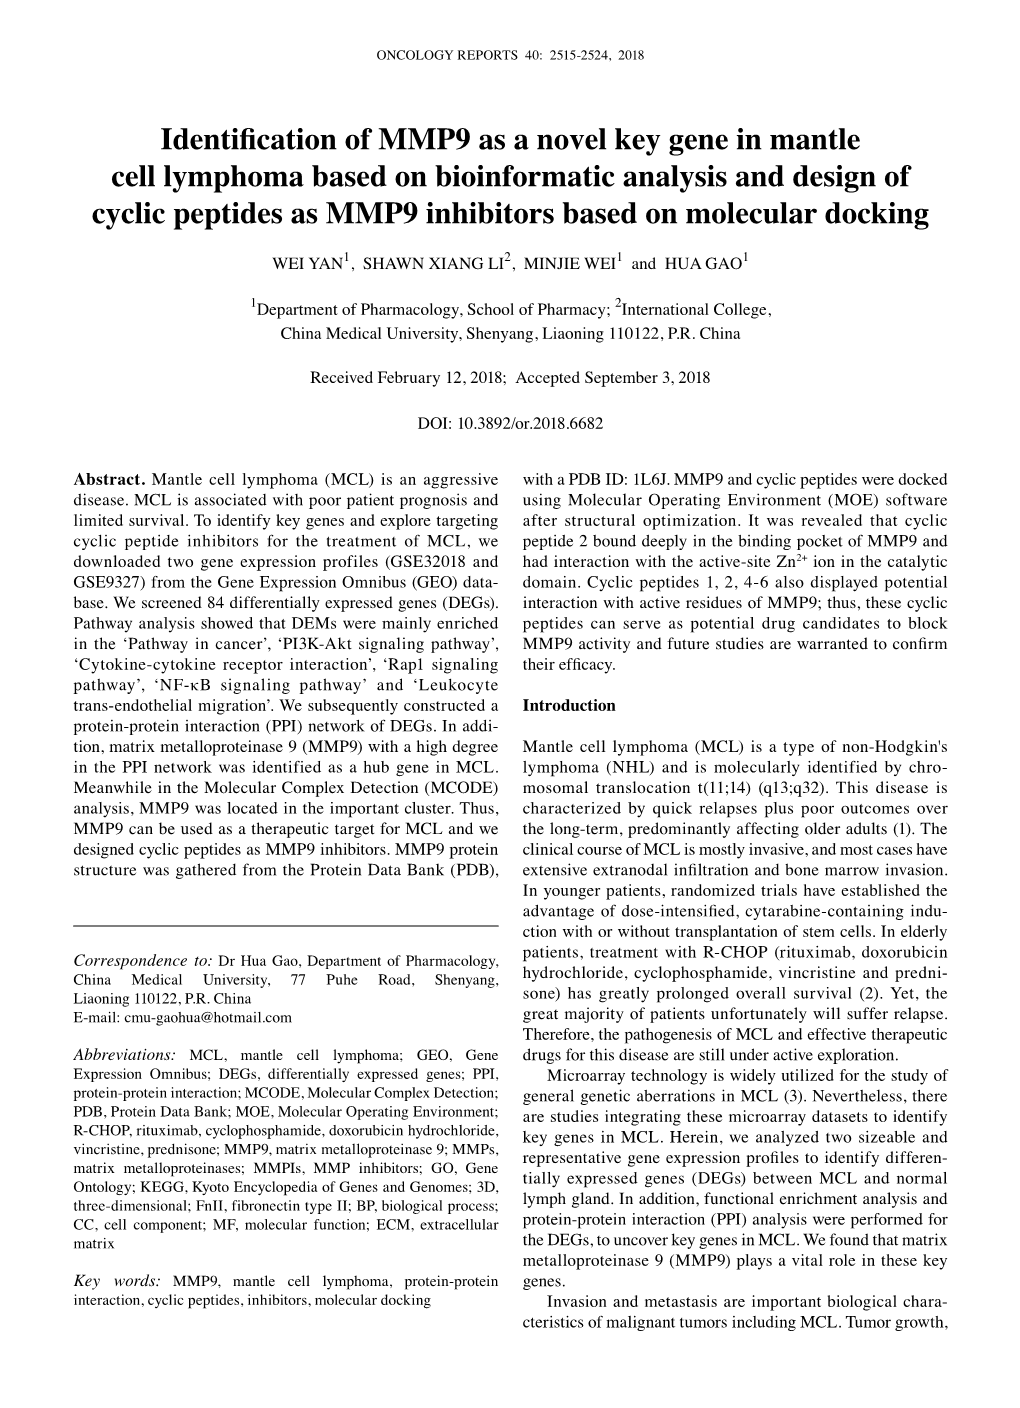 Identification of MMP9 As a Novel Key Gene in Mantle Cell Lymphoma Based on Bioinformatic Analysis and Design of Cyclic Peptide